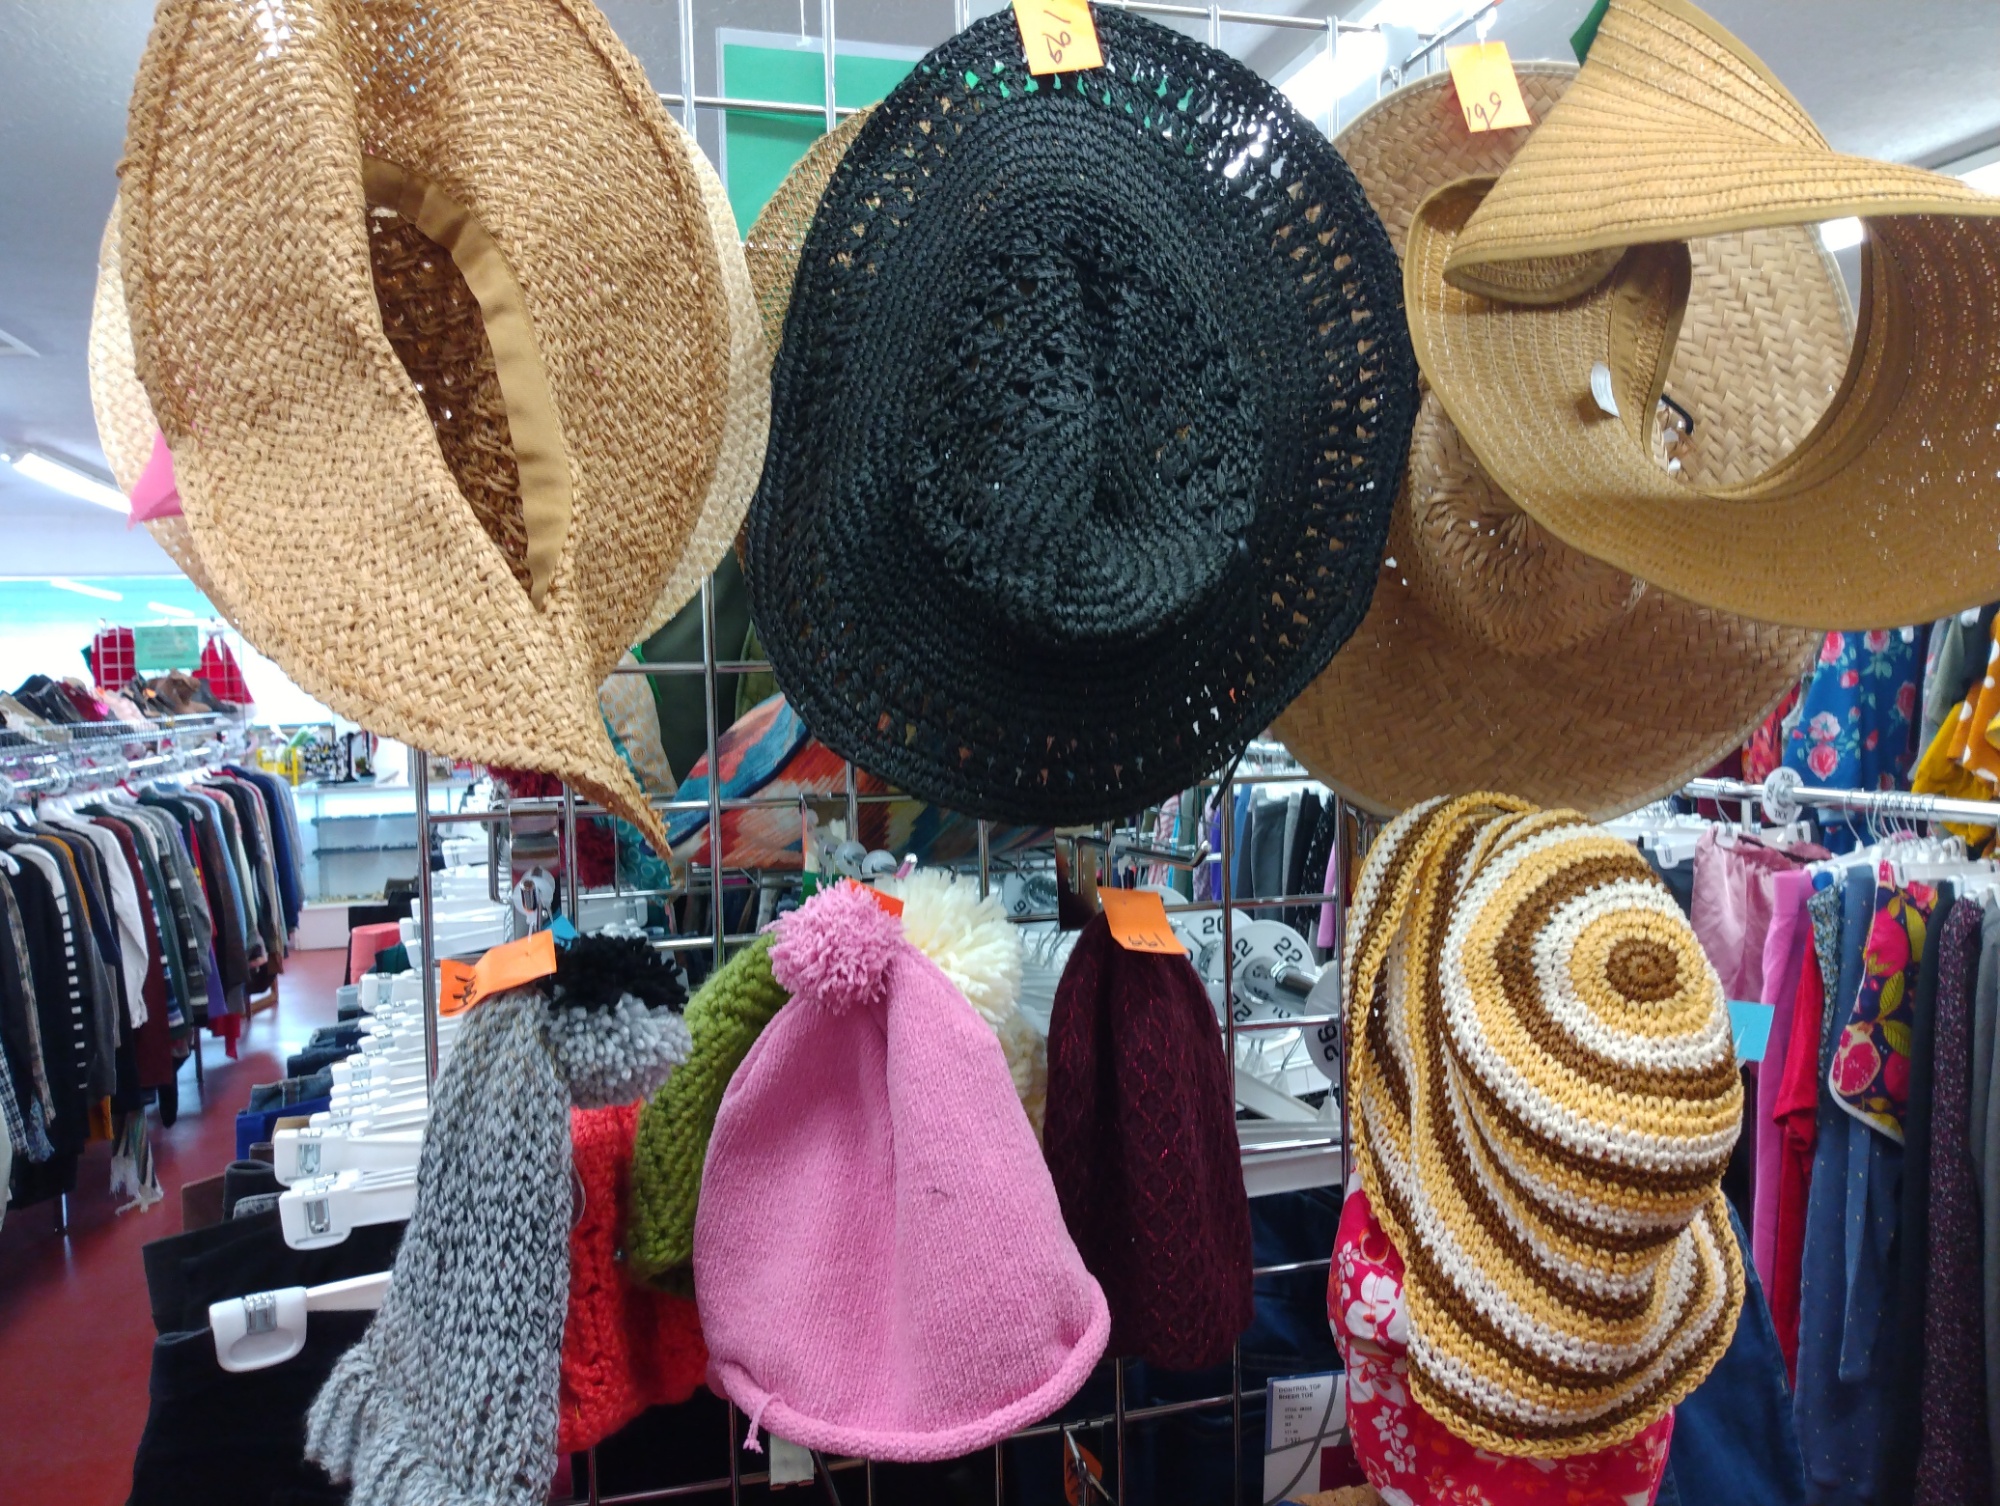 Image of 6 hats hanging up in a thrift store